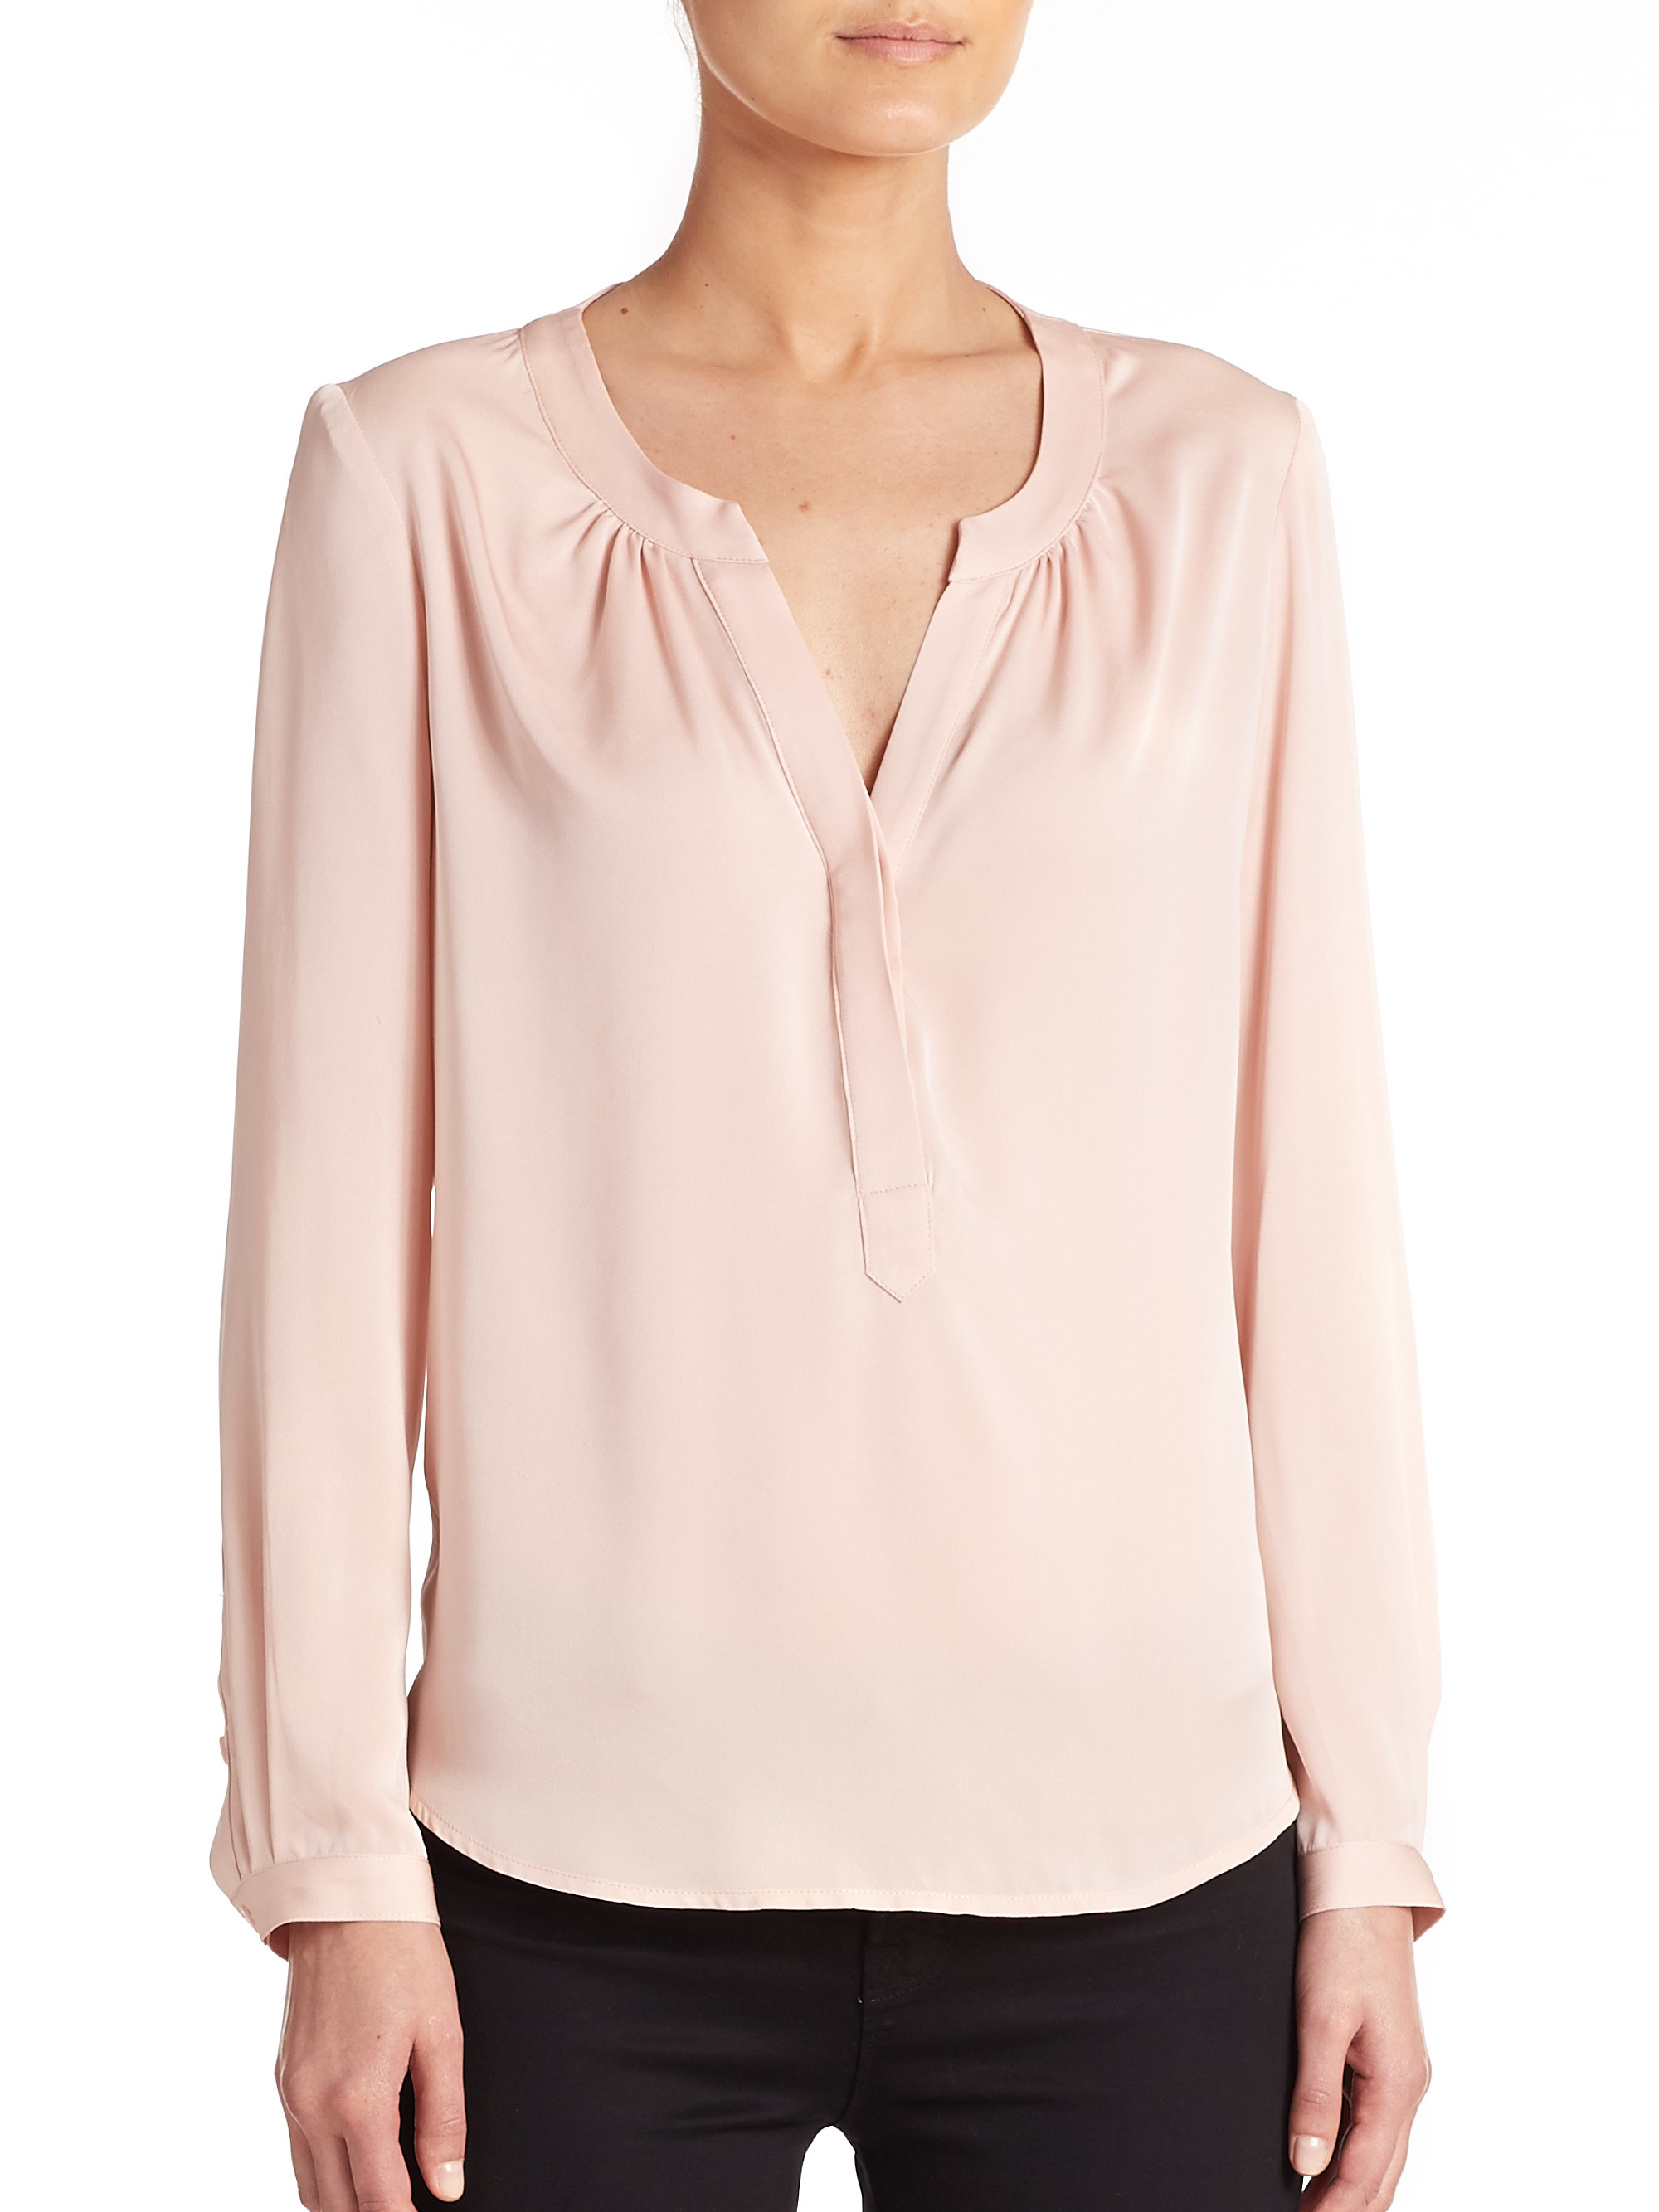 Lyst - Milly Stretch-silk Pullover Blouse in Natural